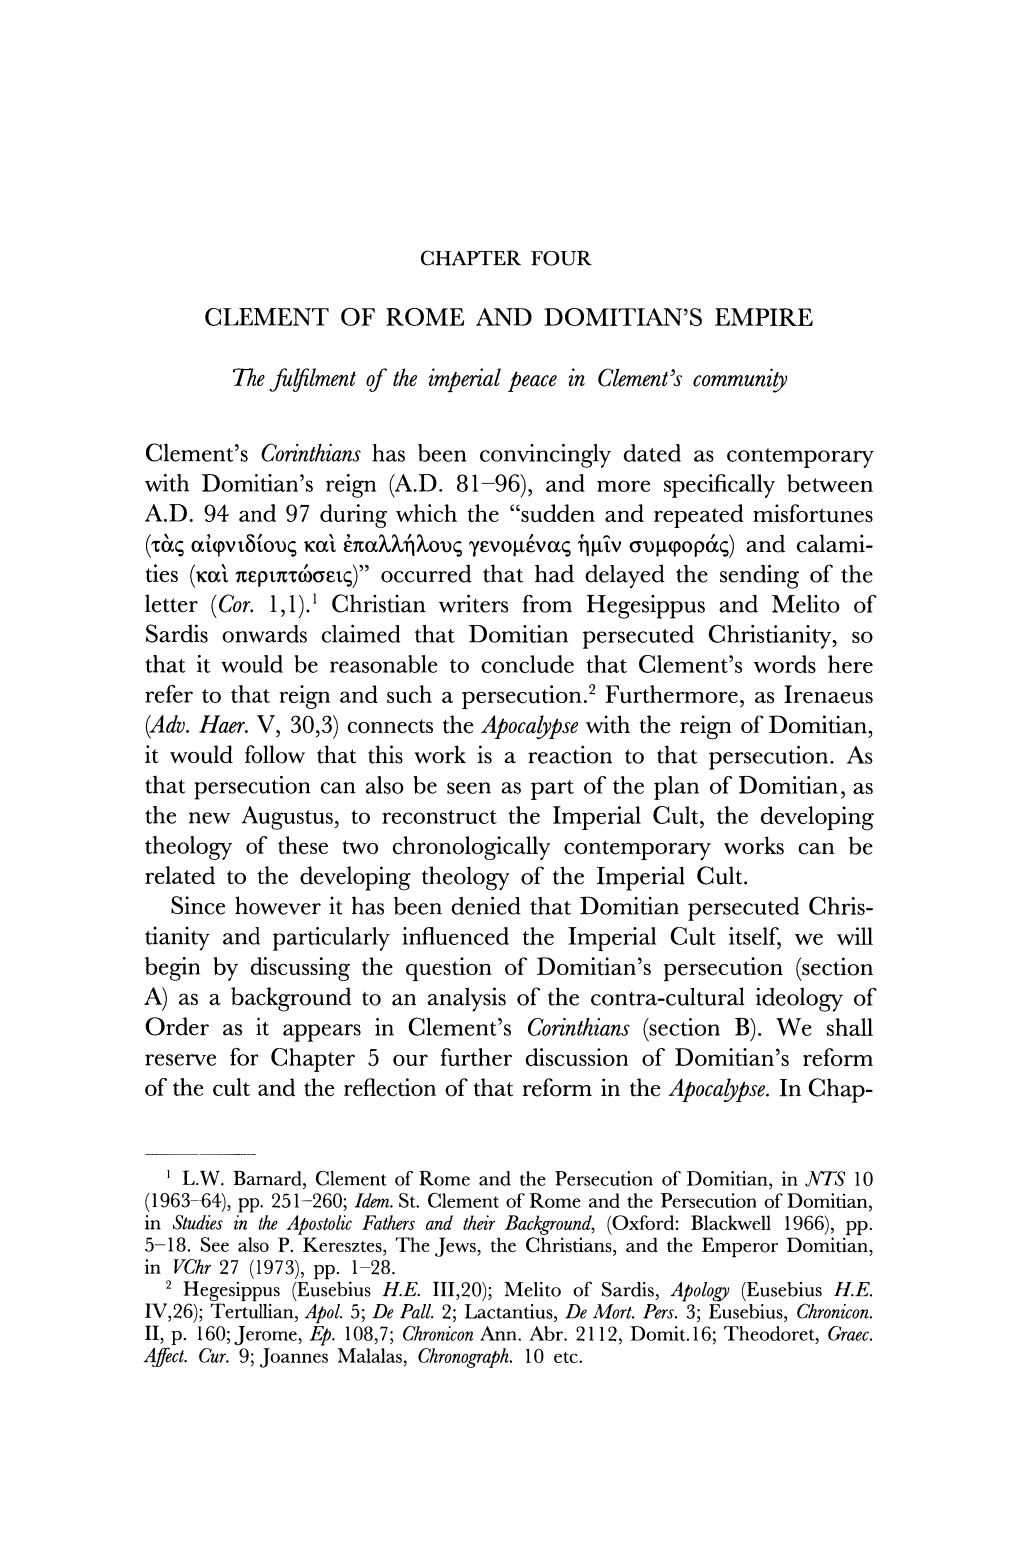 CLEMENT of ROME and DOMITIAN's EMPIRE 7He .Fo!